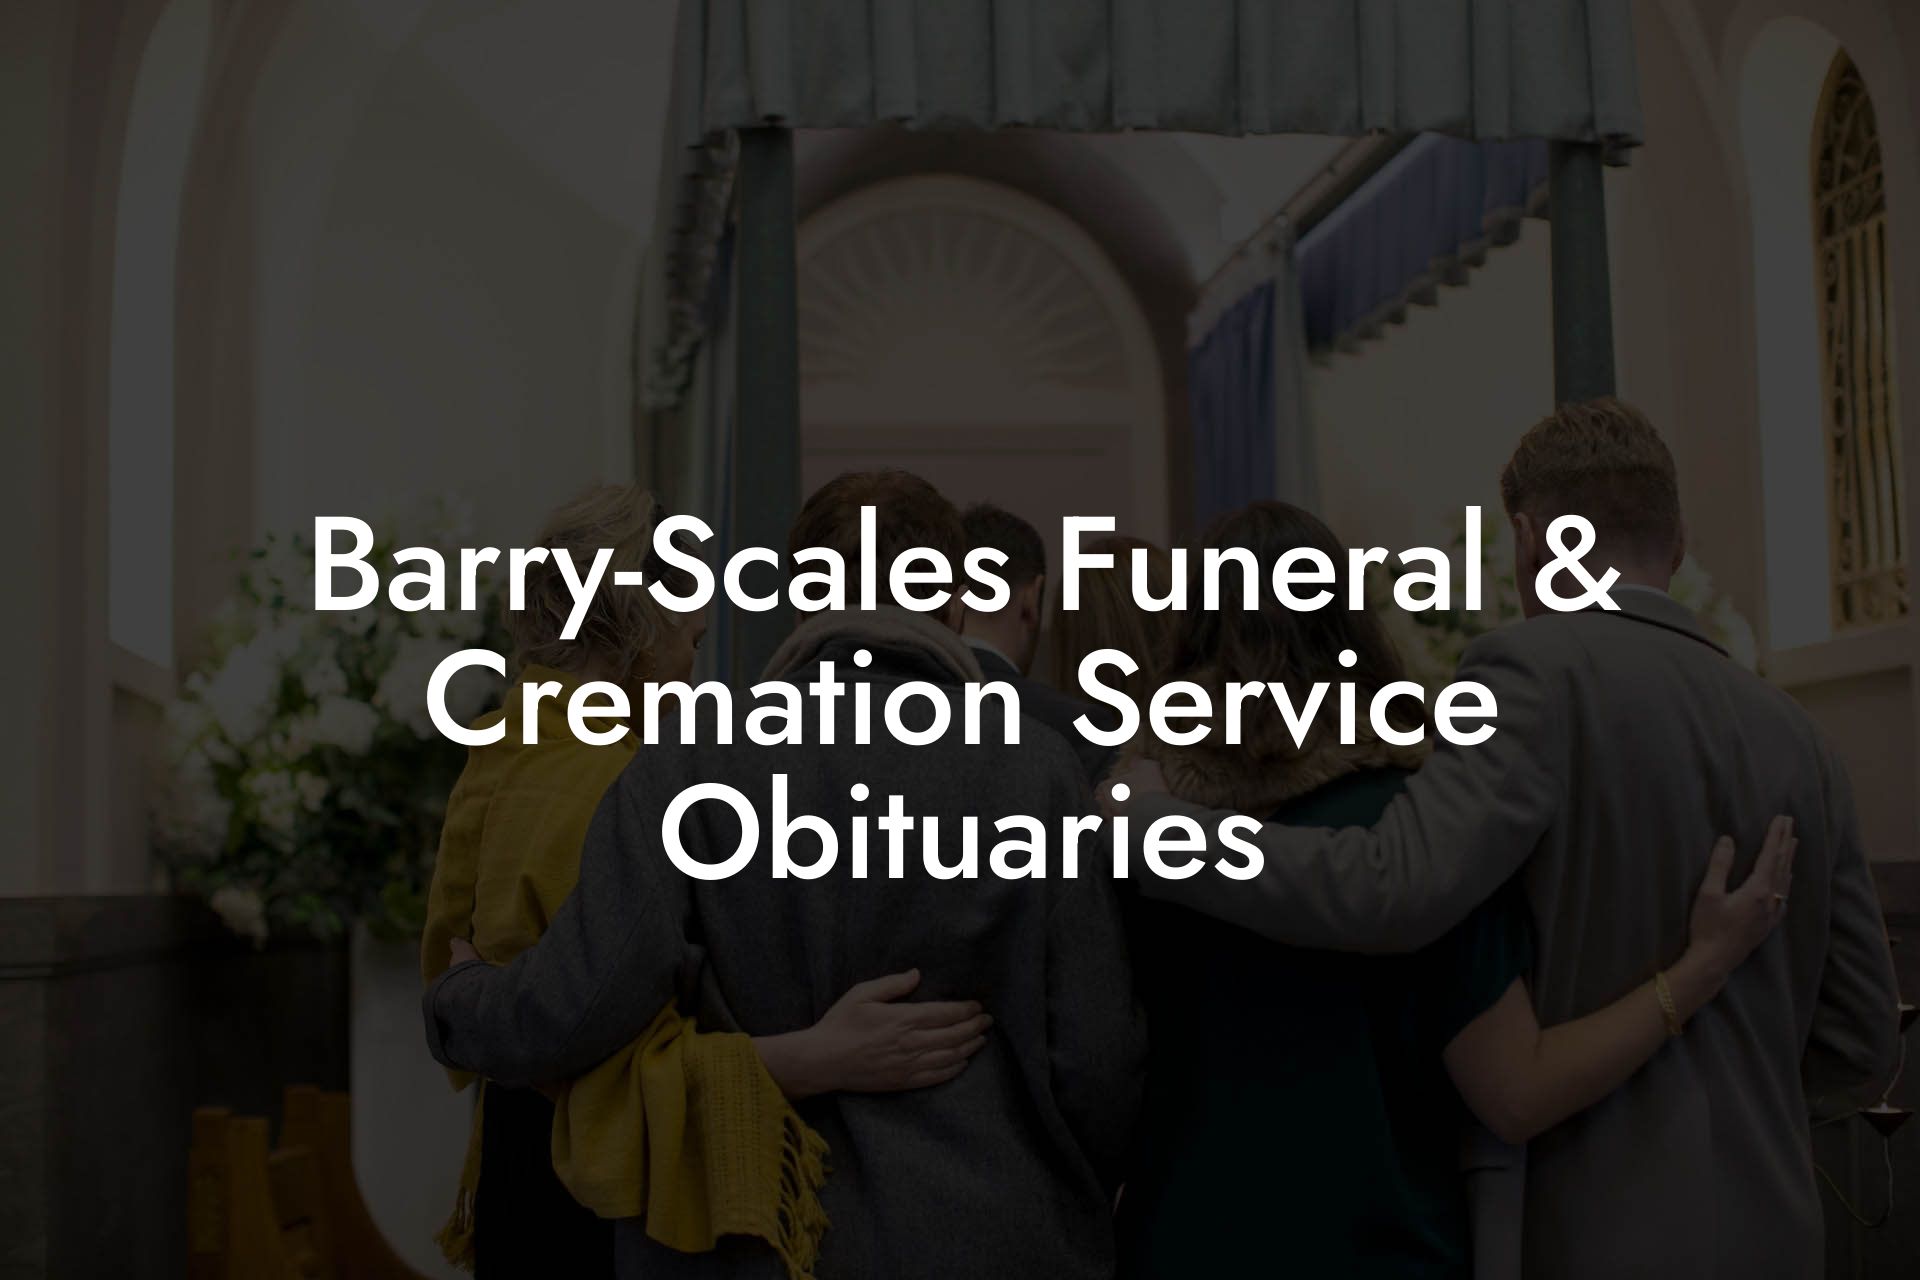 Barry-Scales Funeral & Cremation Service Obituaries